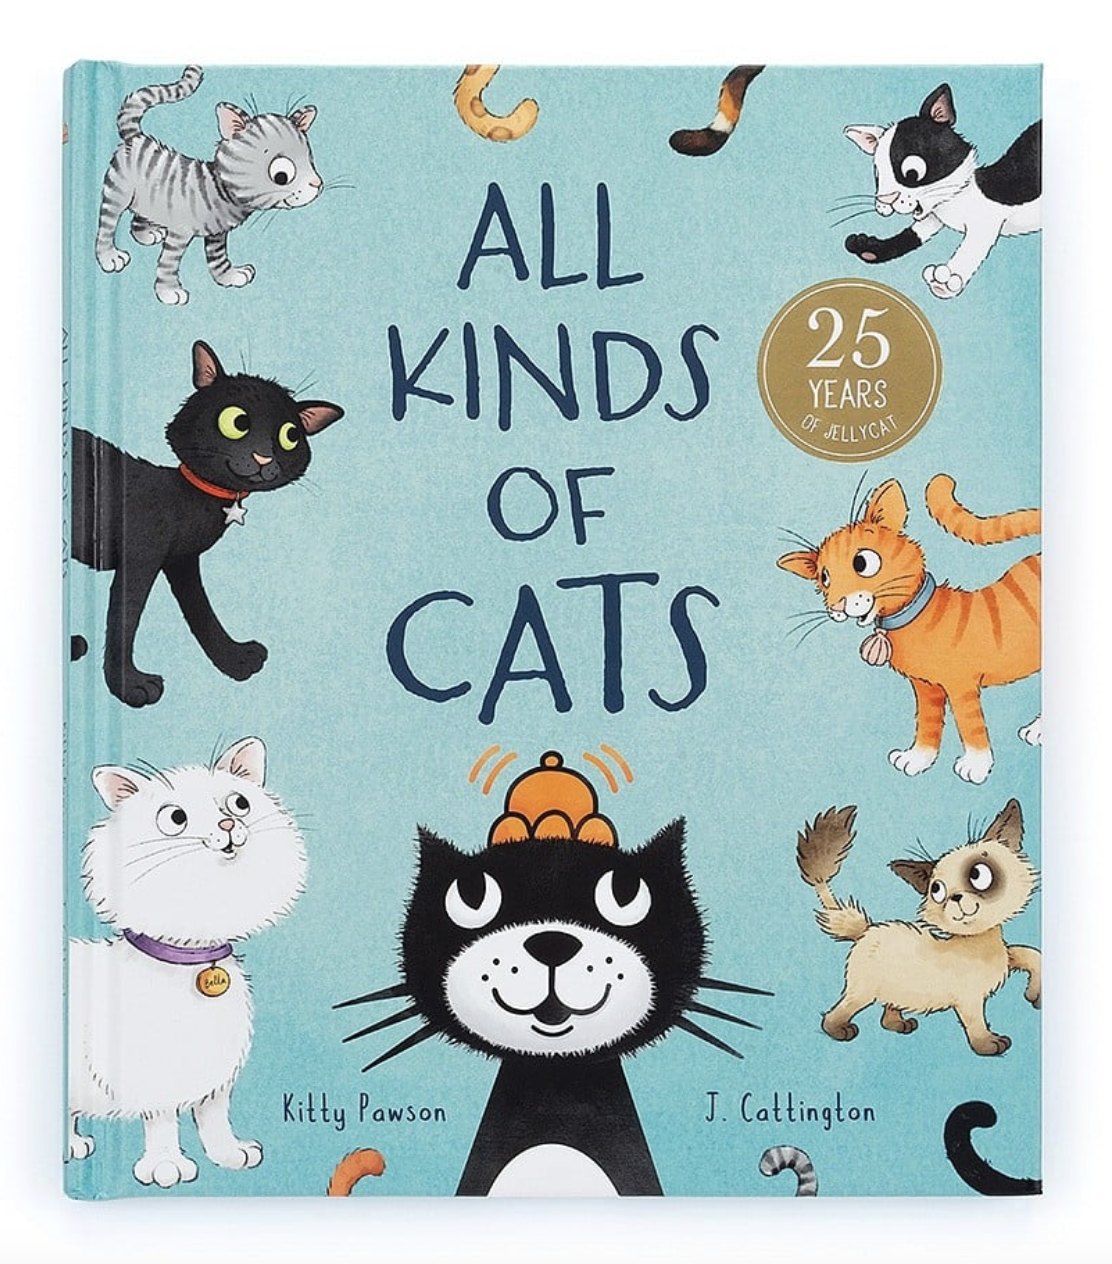 Jellycat All Kinds of Cats Book